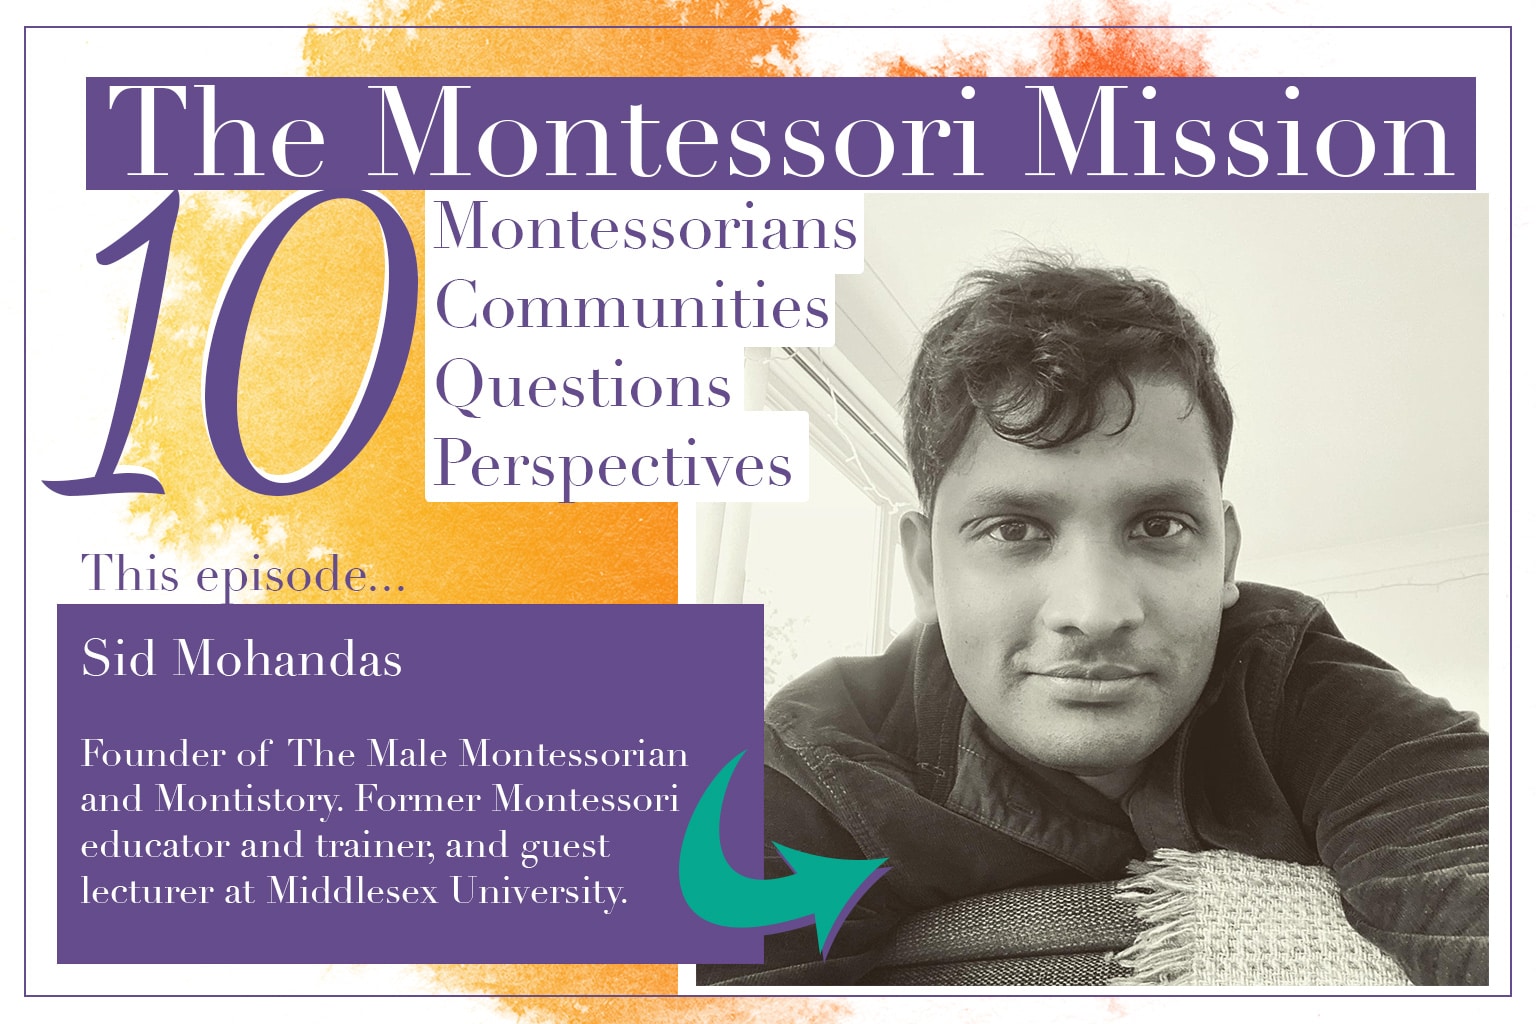 Sid Mohandas, Founder of The Male Montessorian and Montistory